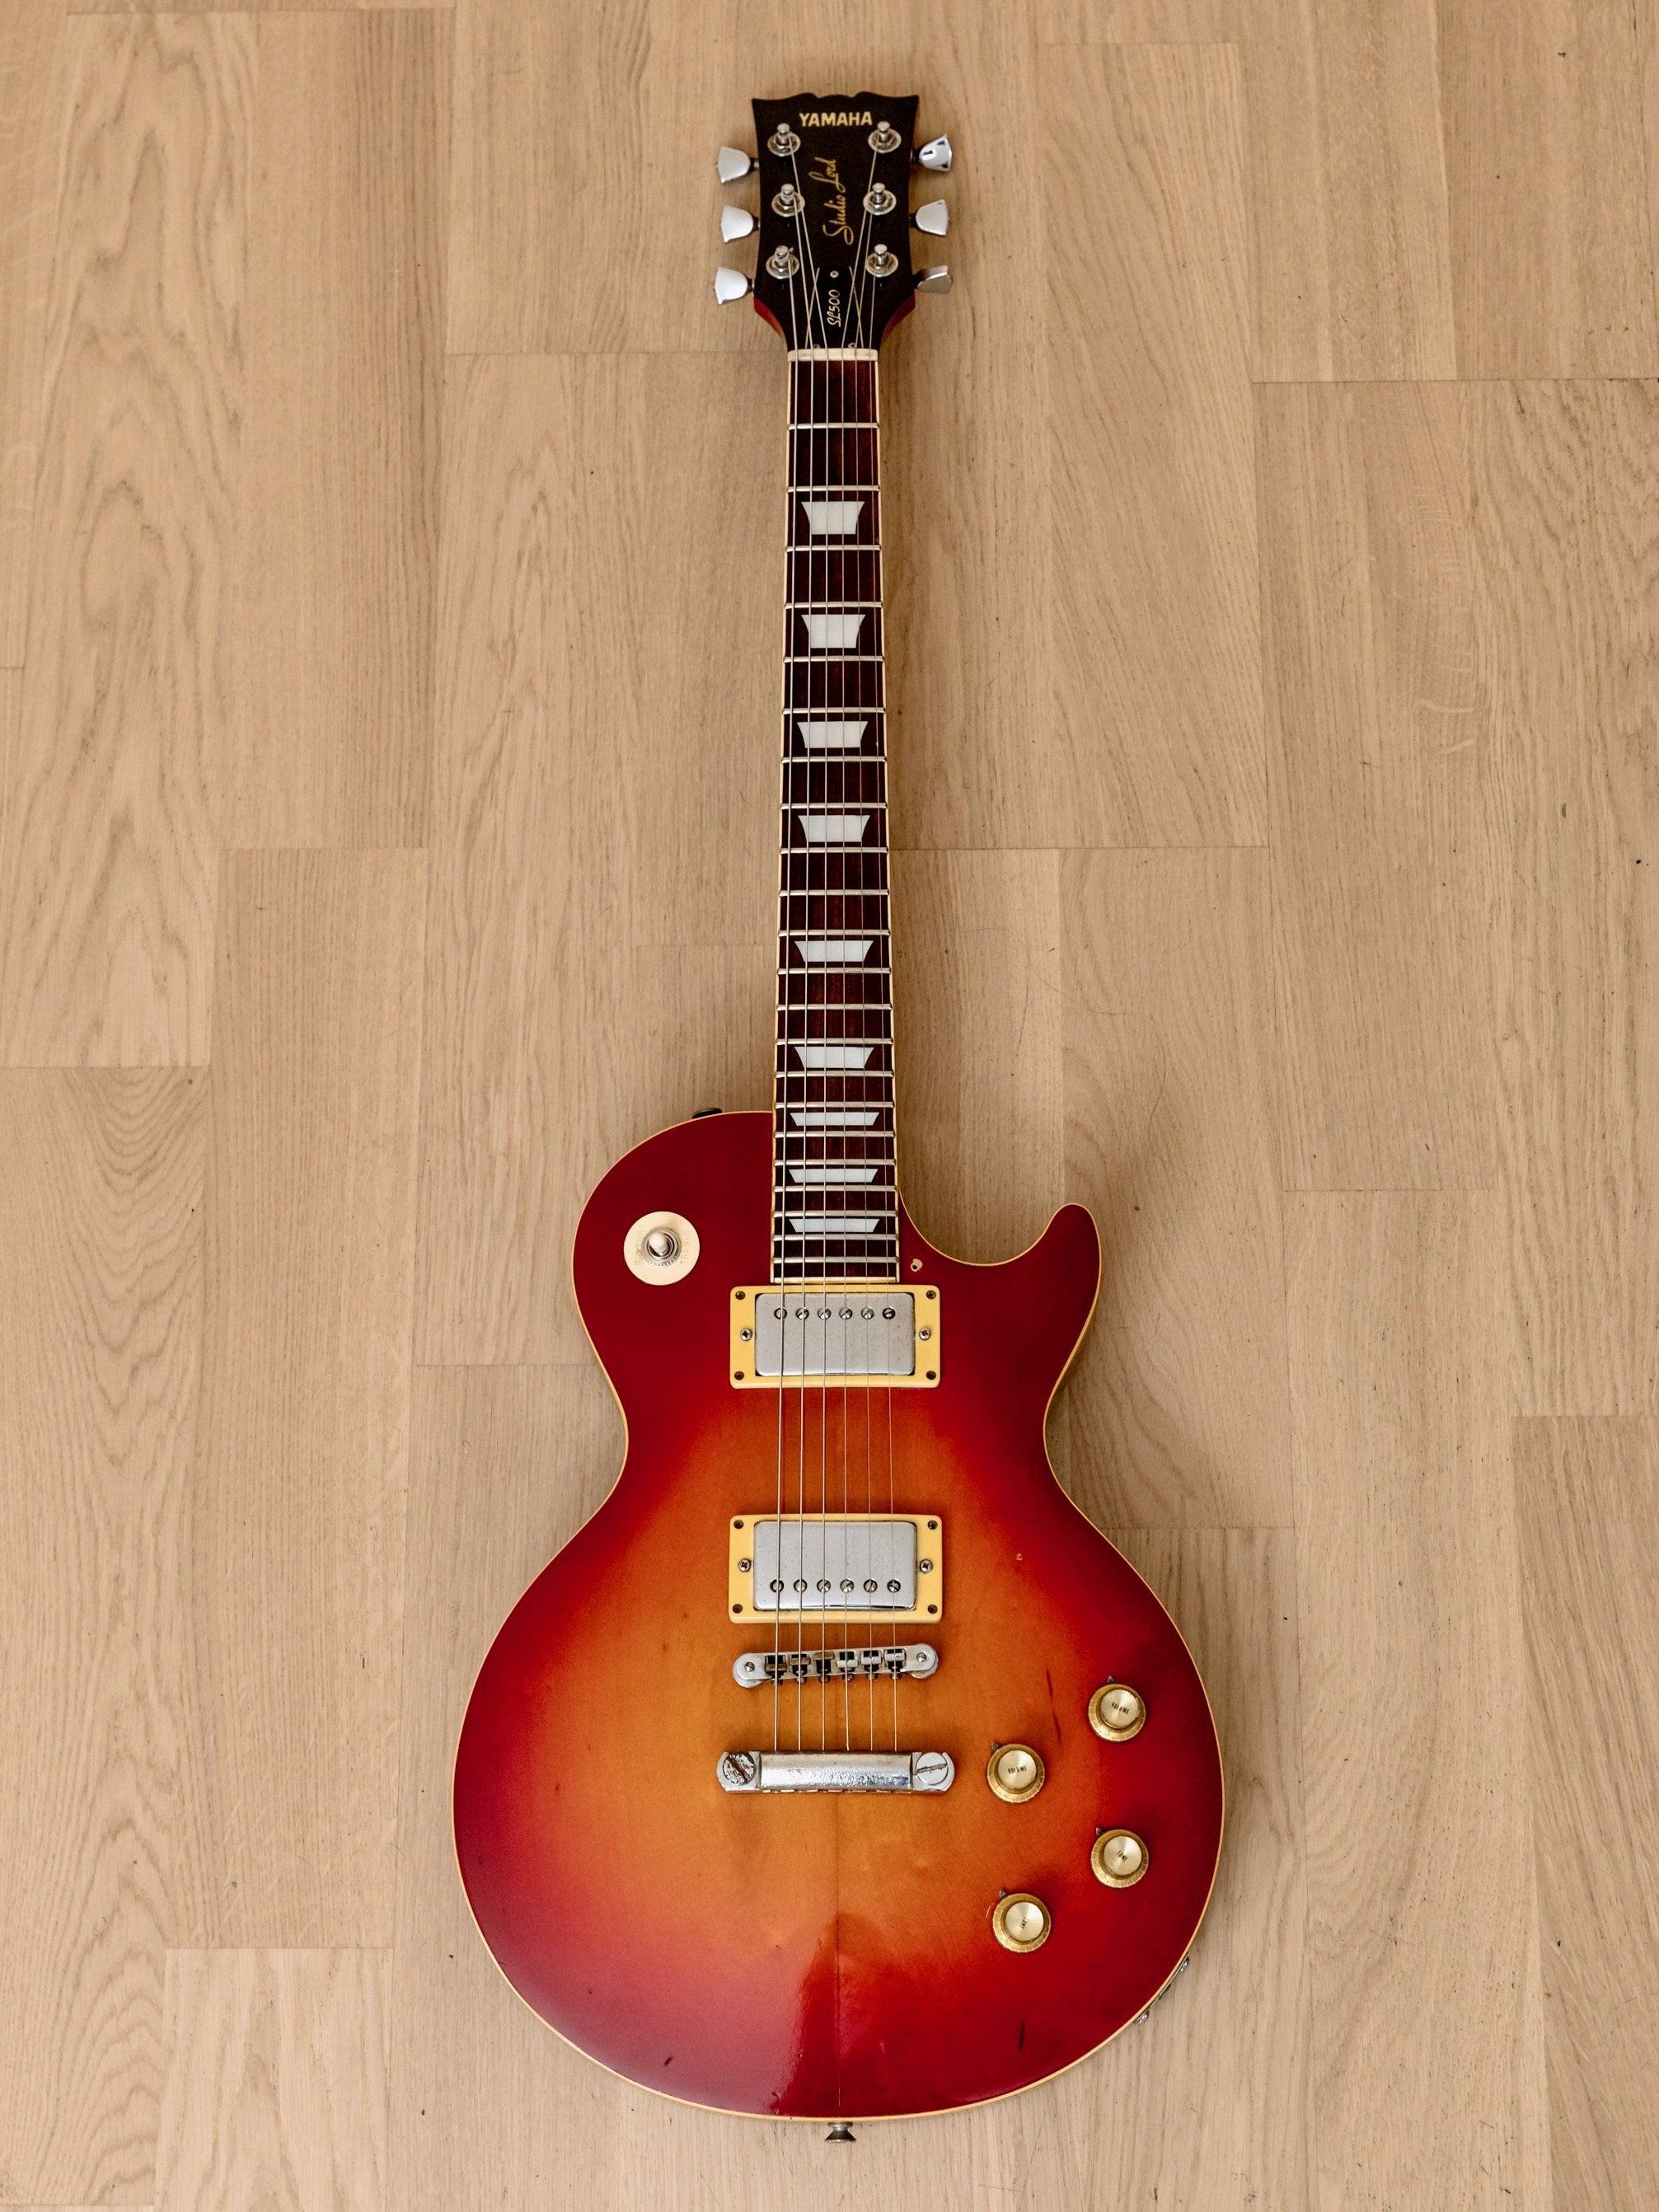 1970s Yamaha SL500 Studio Lord LP-Style Vintage Electric Guitar Cherry –  Mike & Mike's Guitar Bar